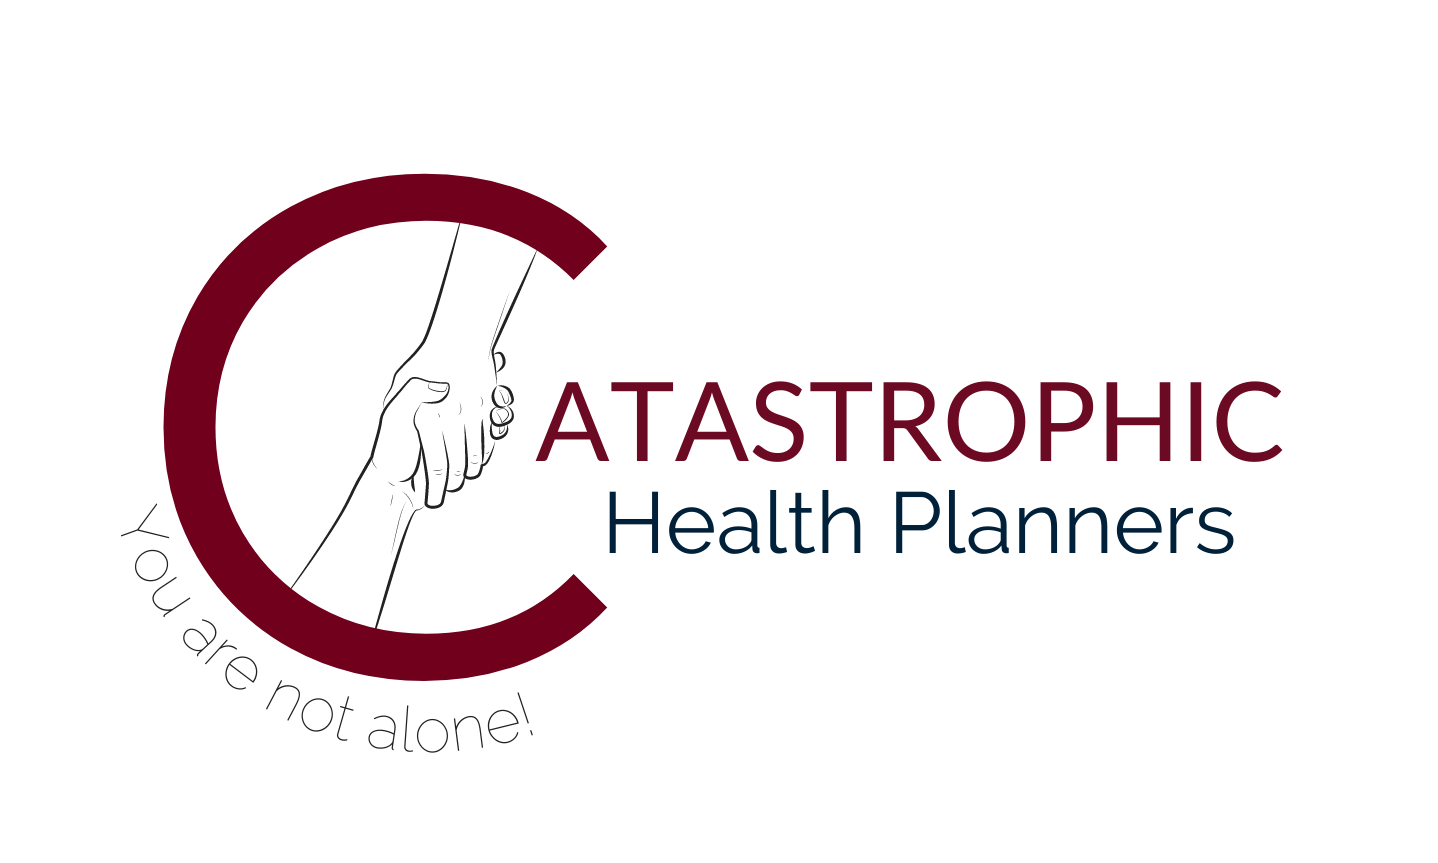 Catastrophic Health Planners